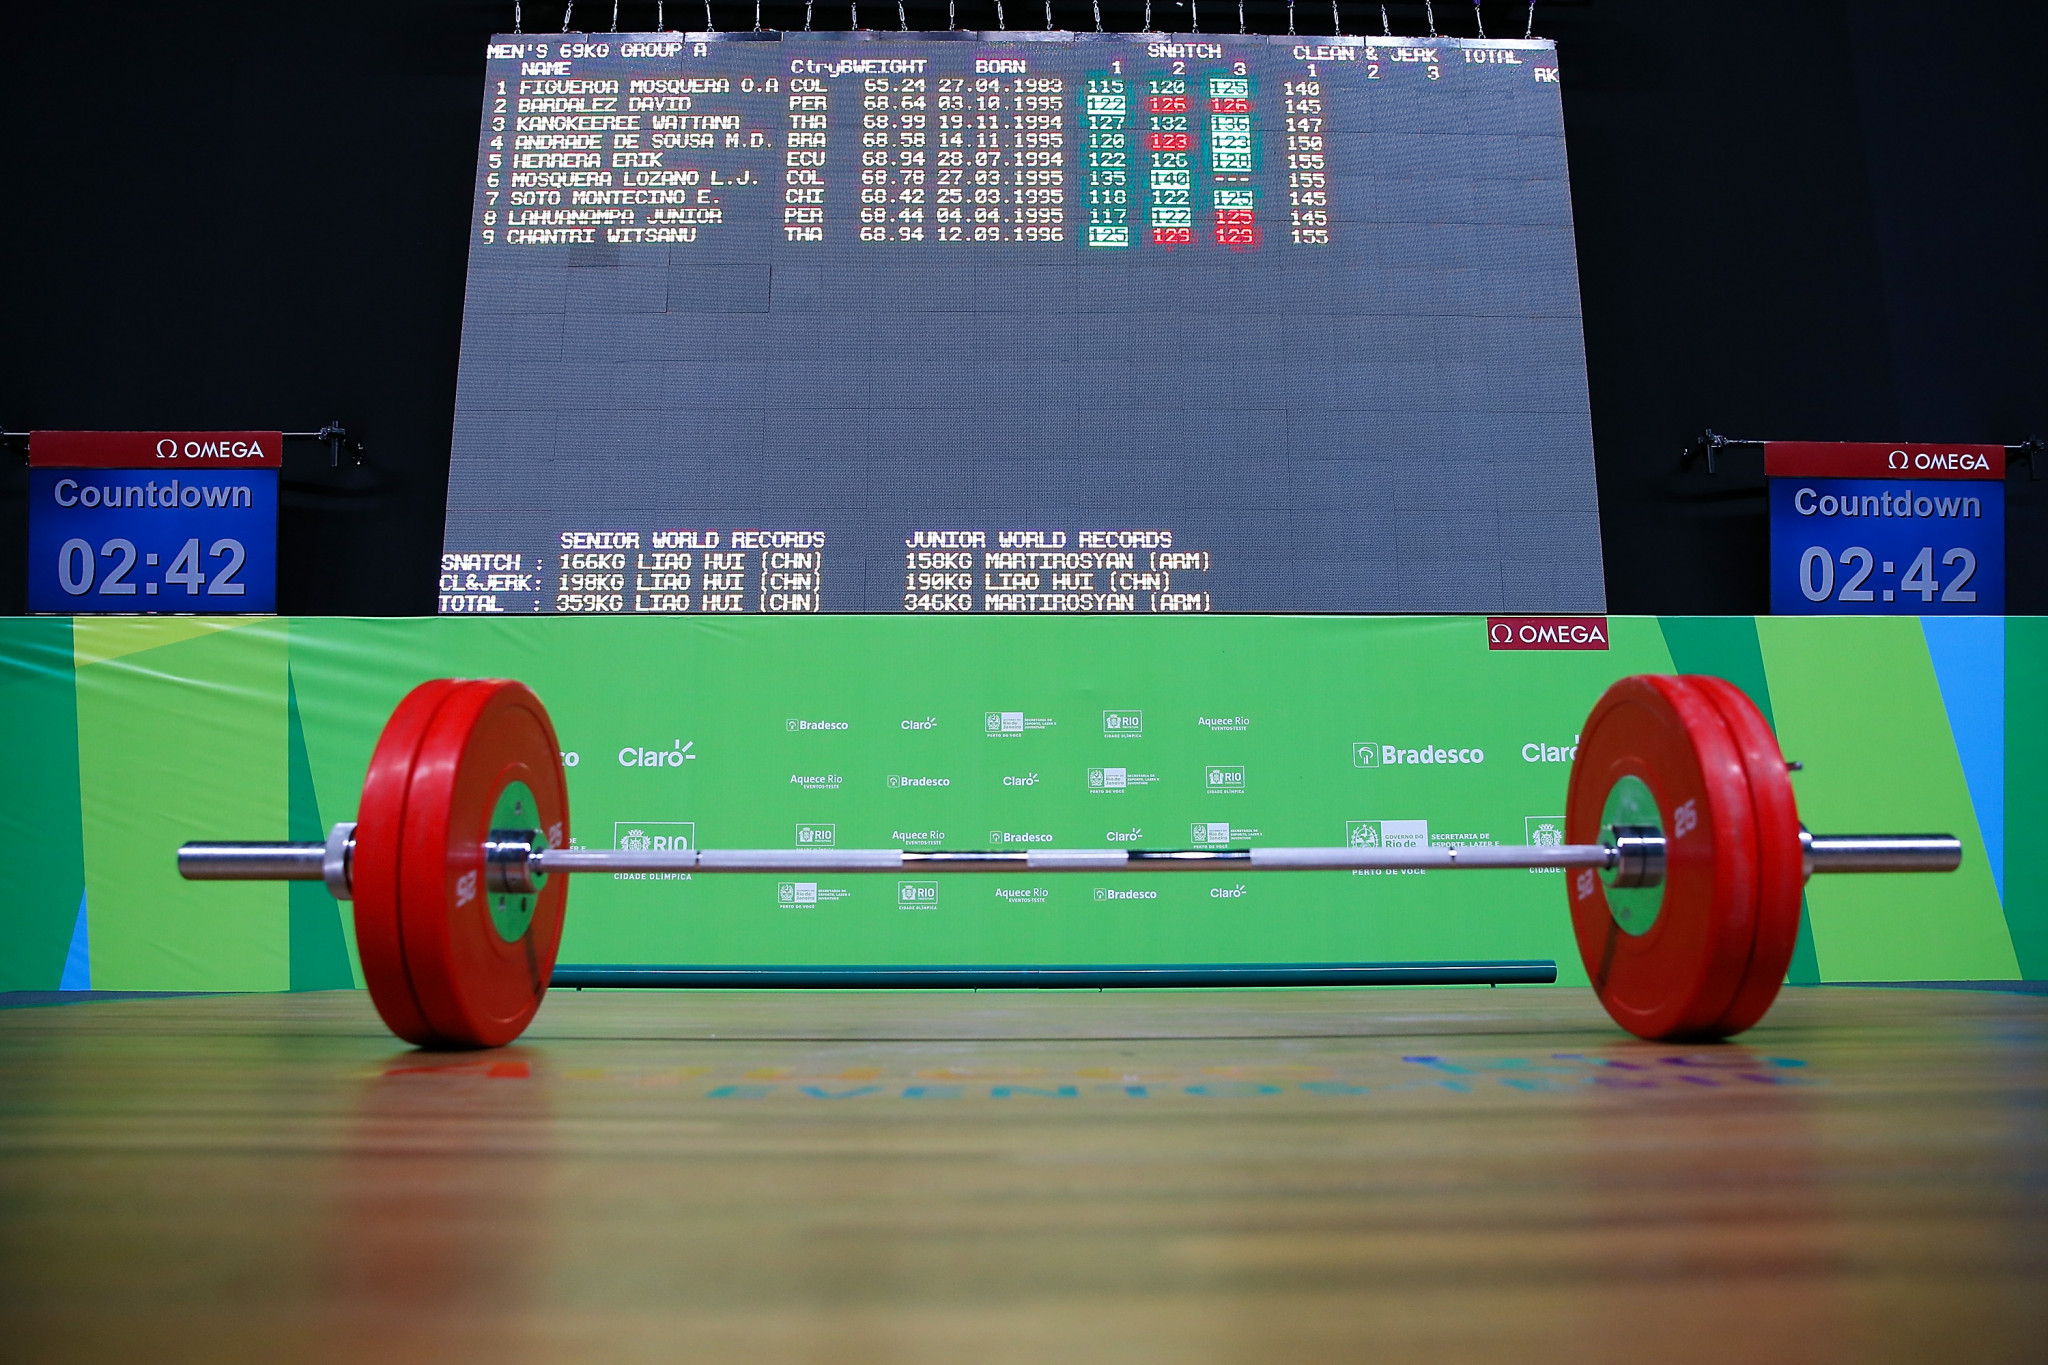 Spanish weightlifter cleared despite testing positive after mix-up over destroyed sample  